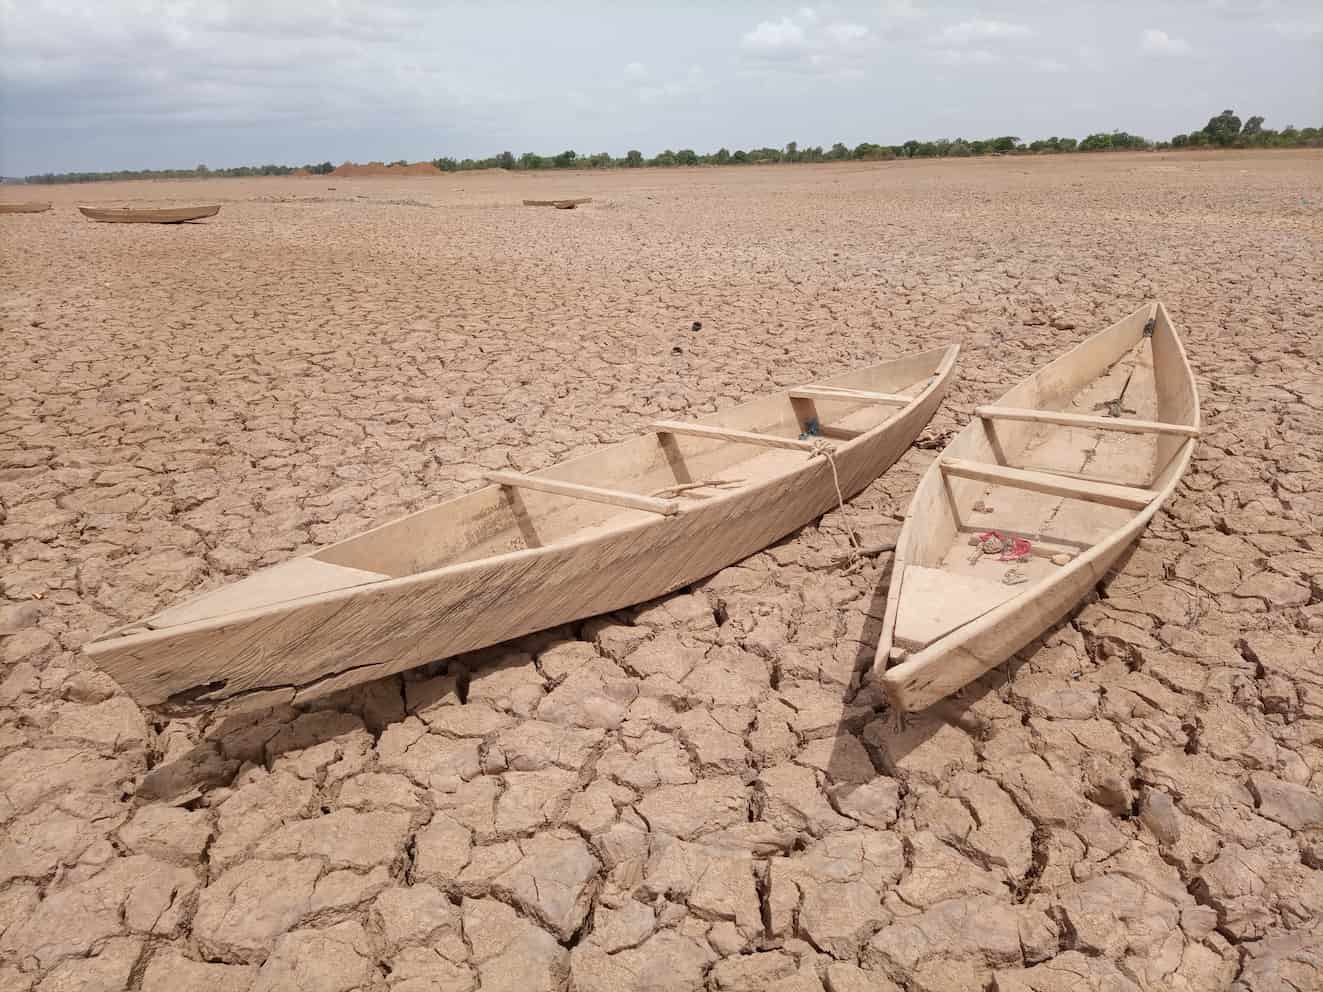 Two canoes on a fully dried-up lake